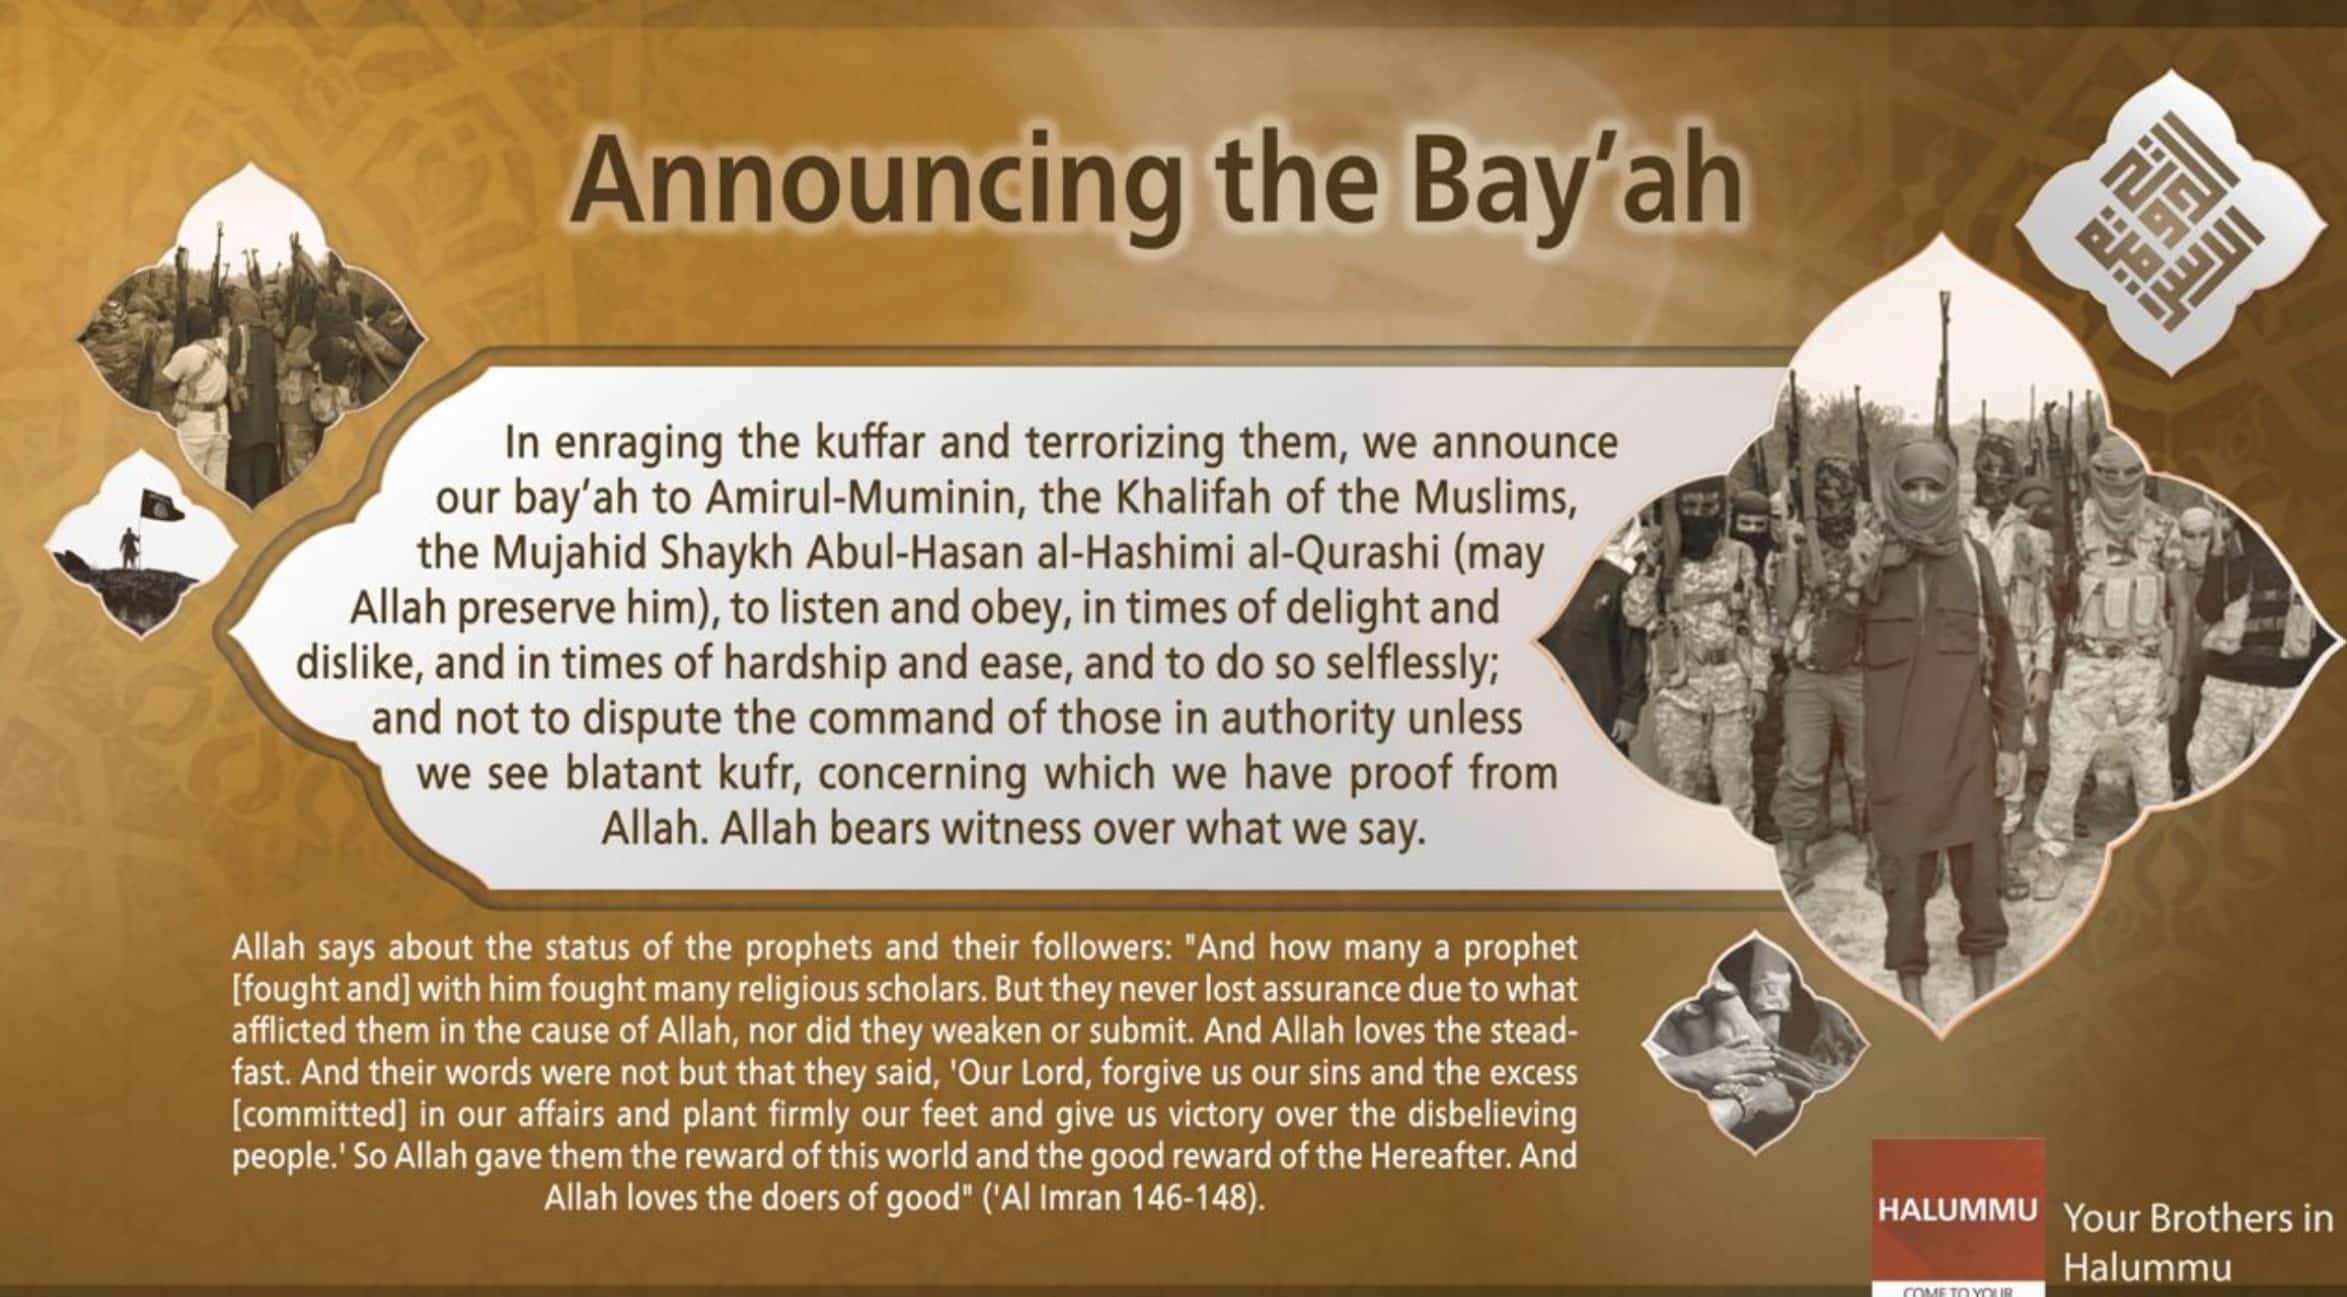 (Poster) Halummu (Unofficial Islamic State) Circulate: "Announcing the Bay'ah" - 10 March 2022